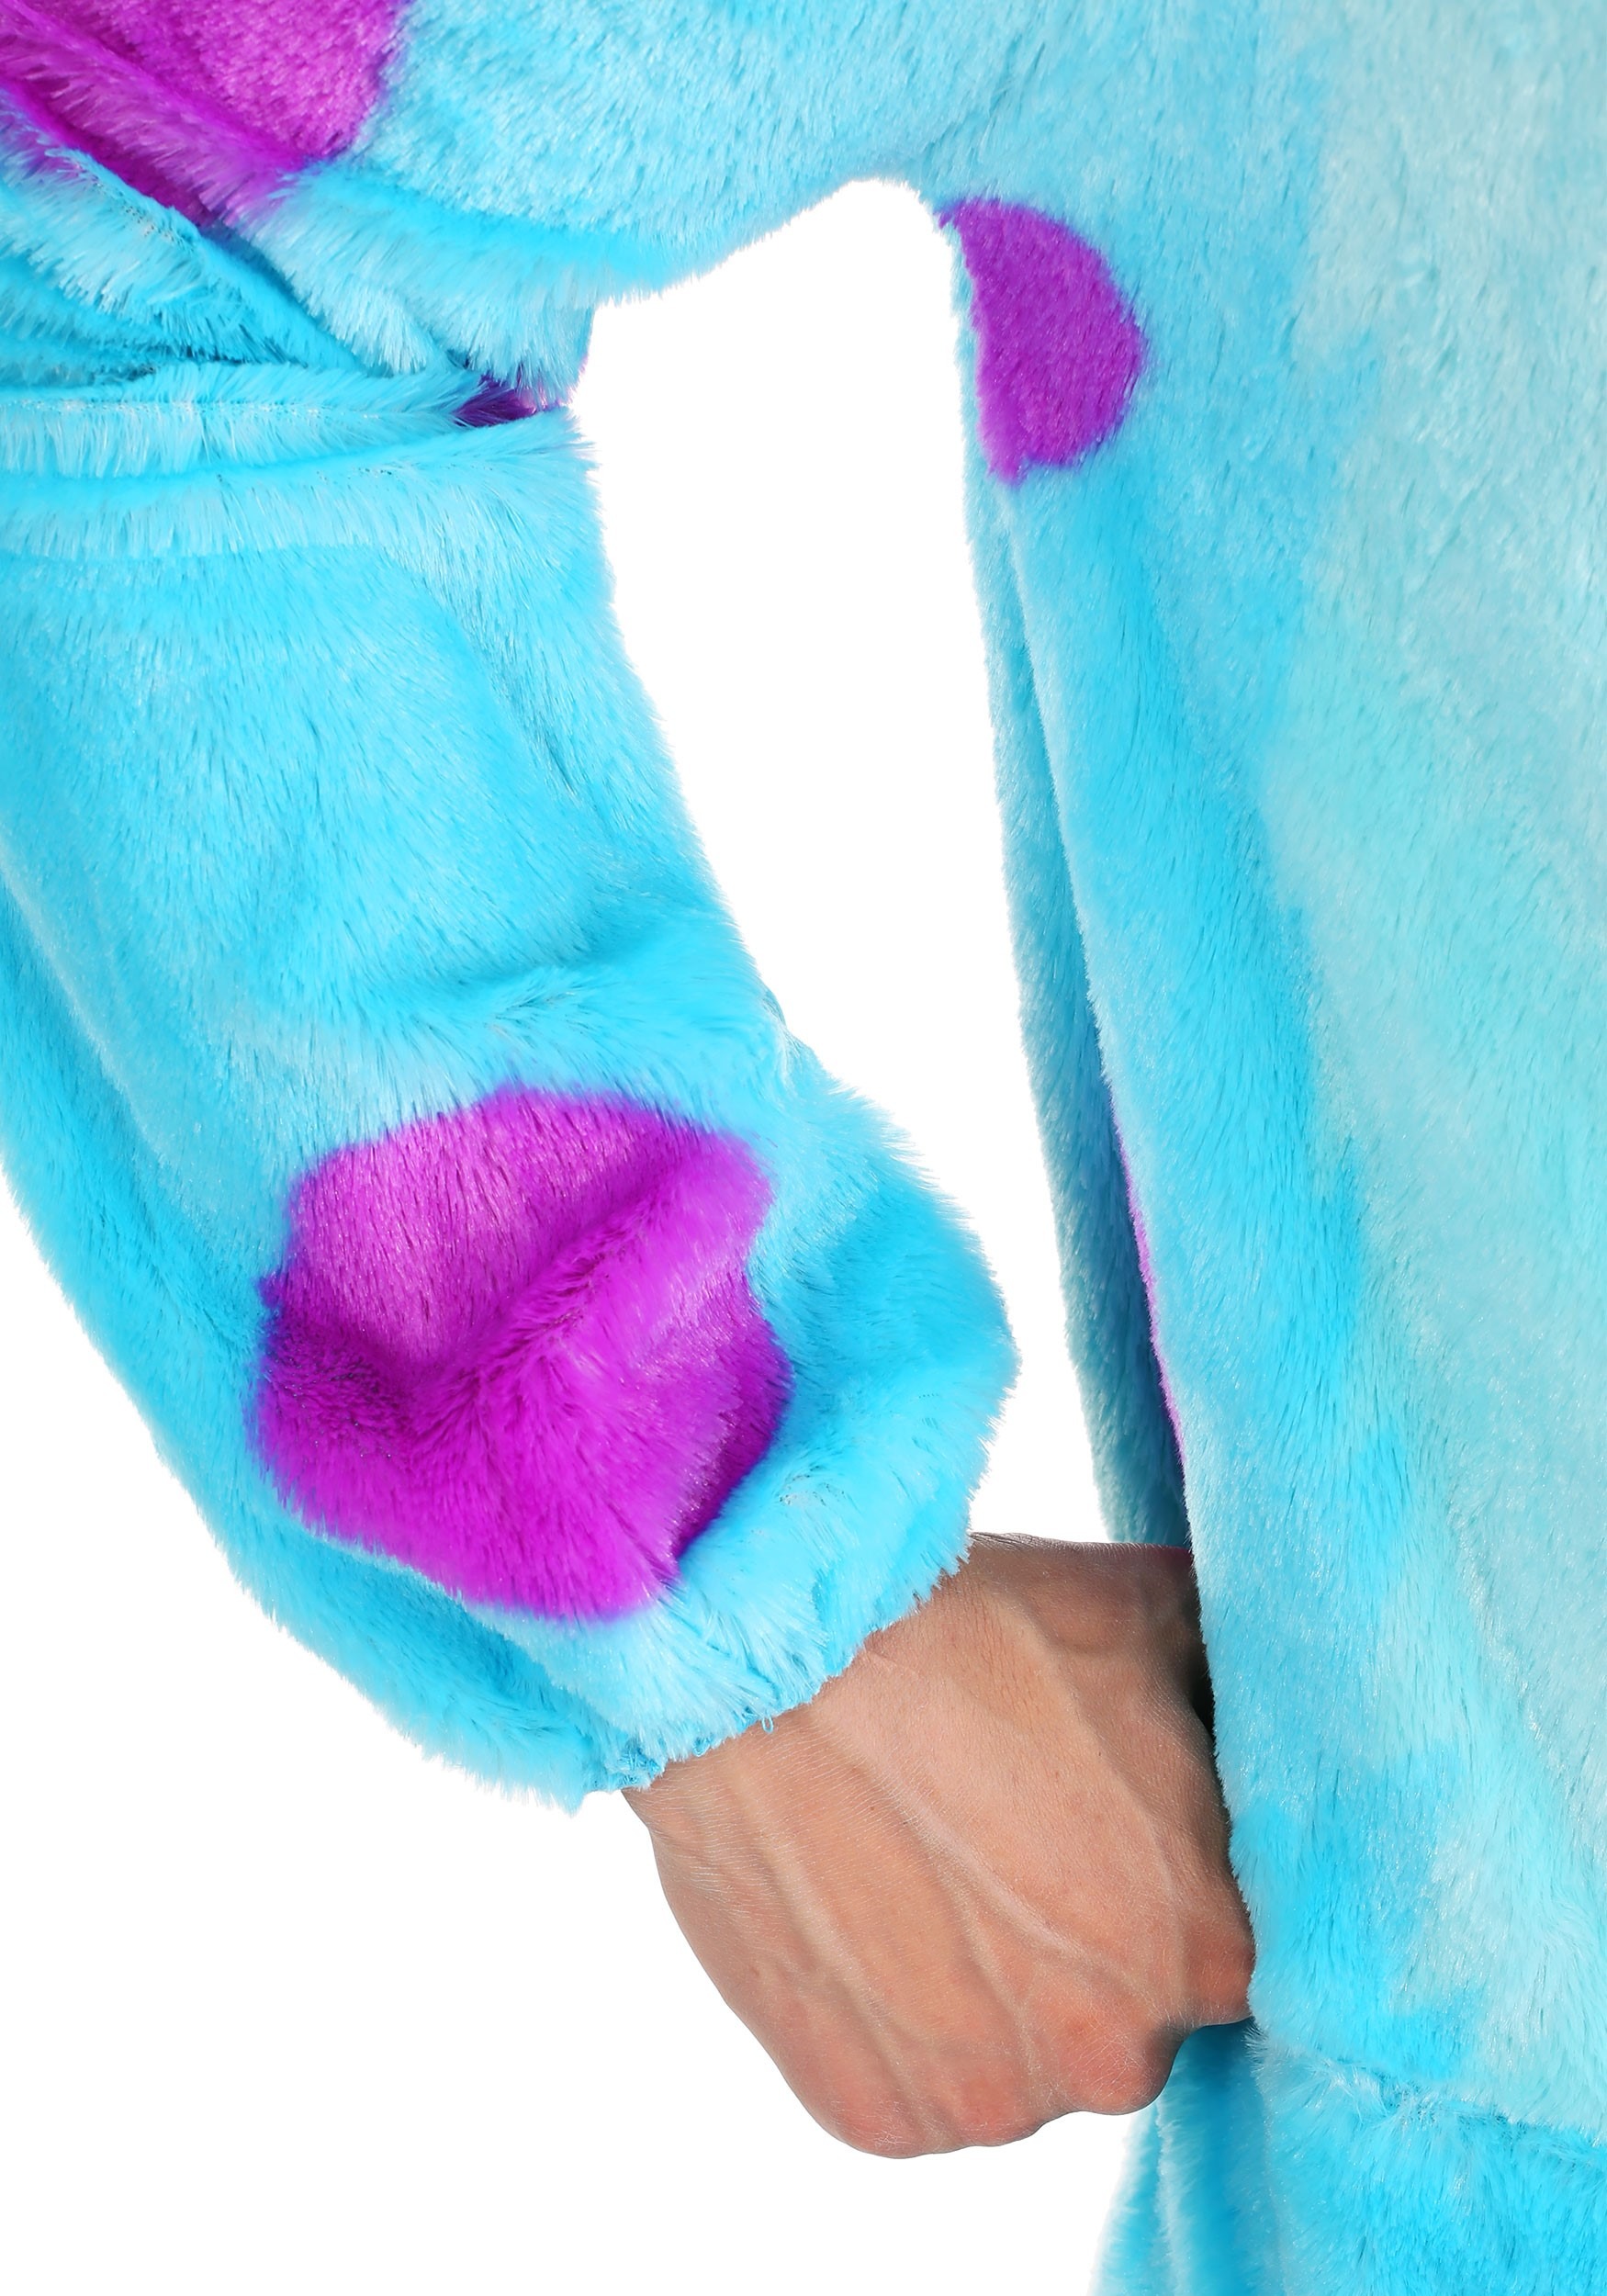 Adult Sulley Costume , Monsters Inc. Costumes